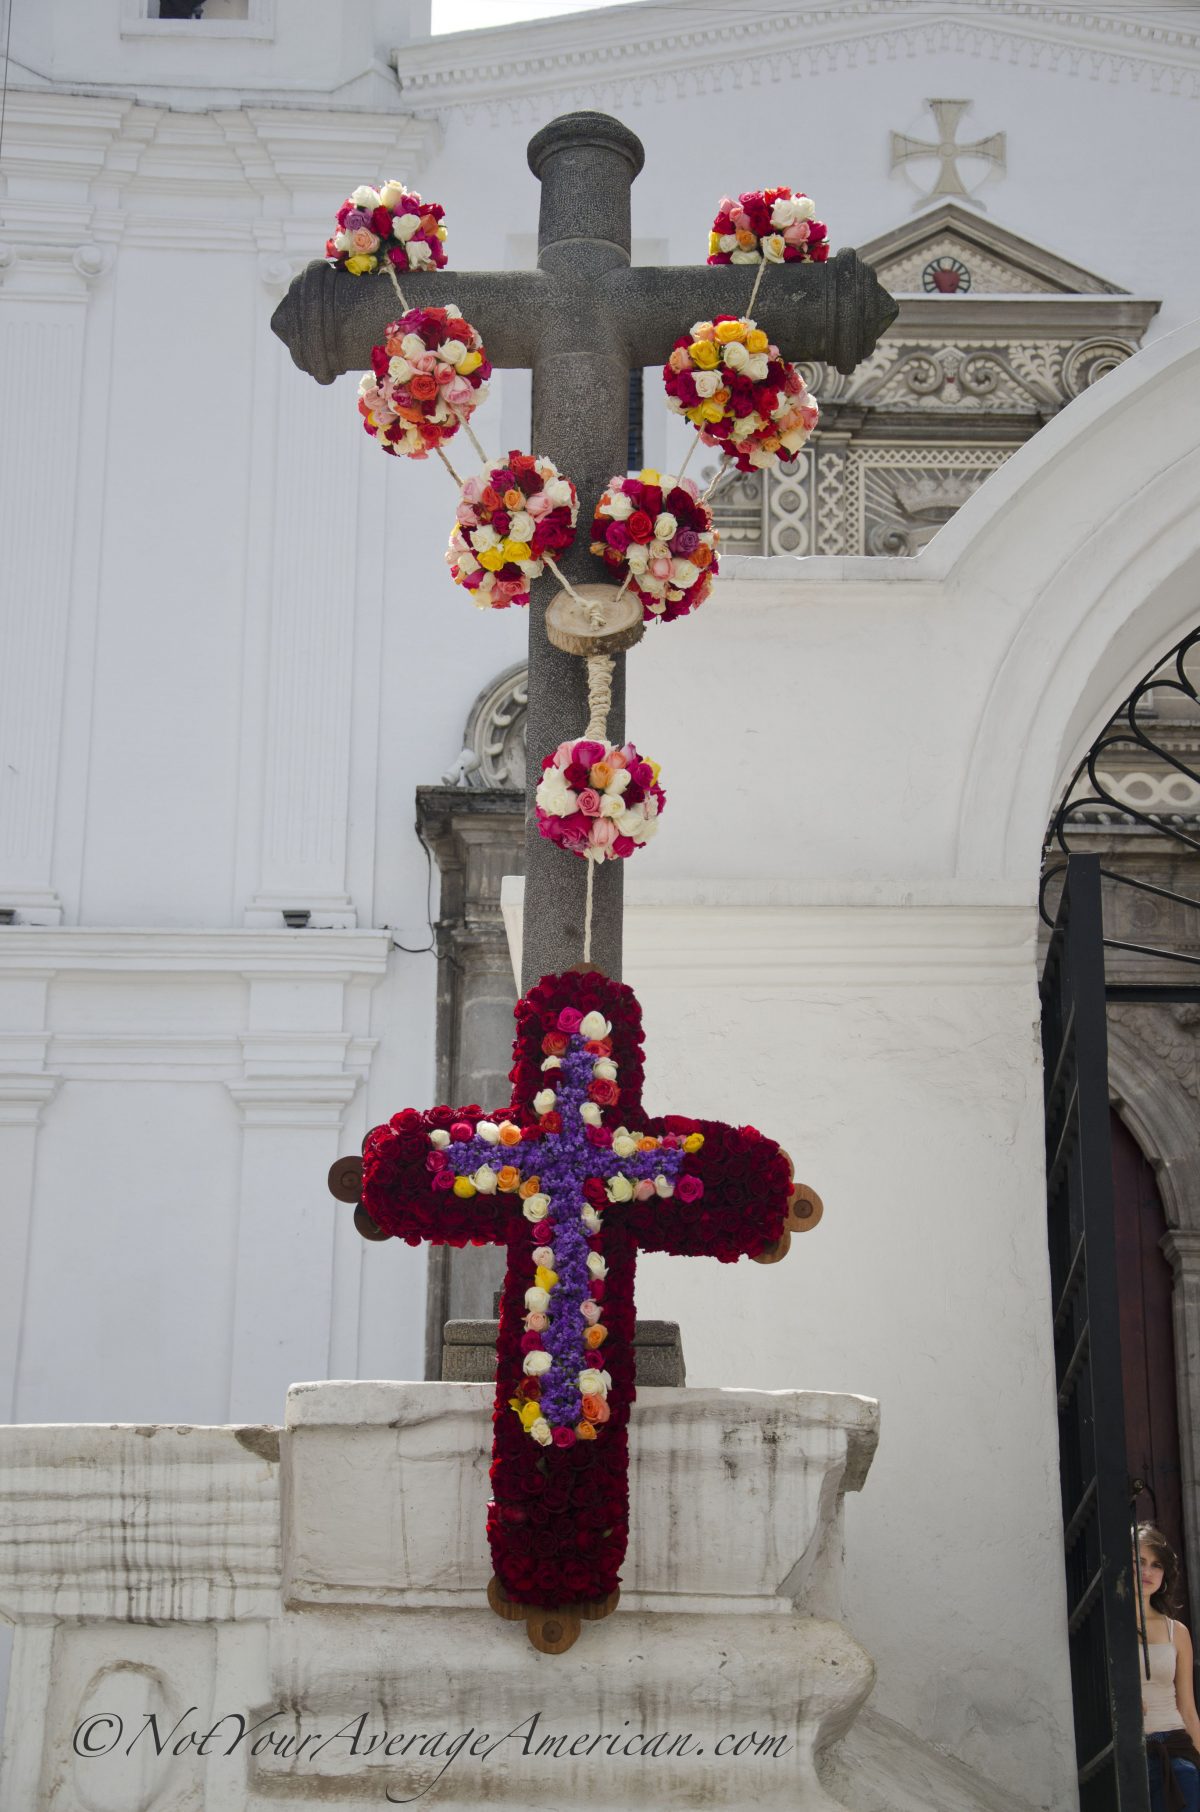 The rose draped cross in the afternoon light in front of the Convento del Carmen Alto | ©Angela Drake